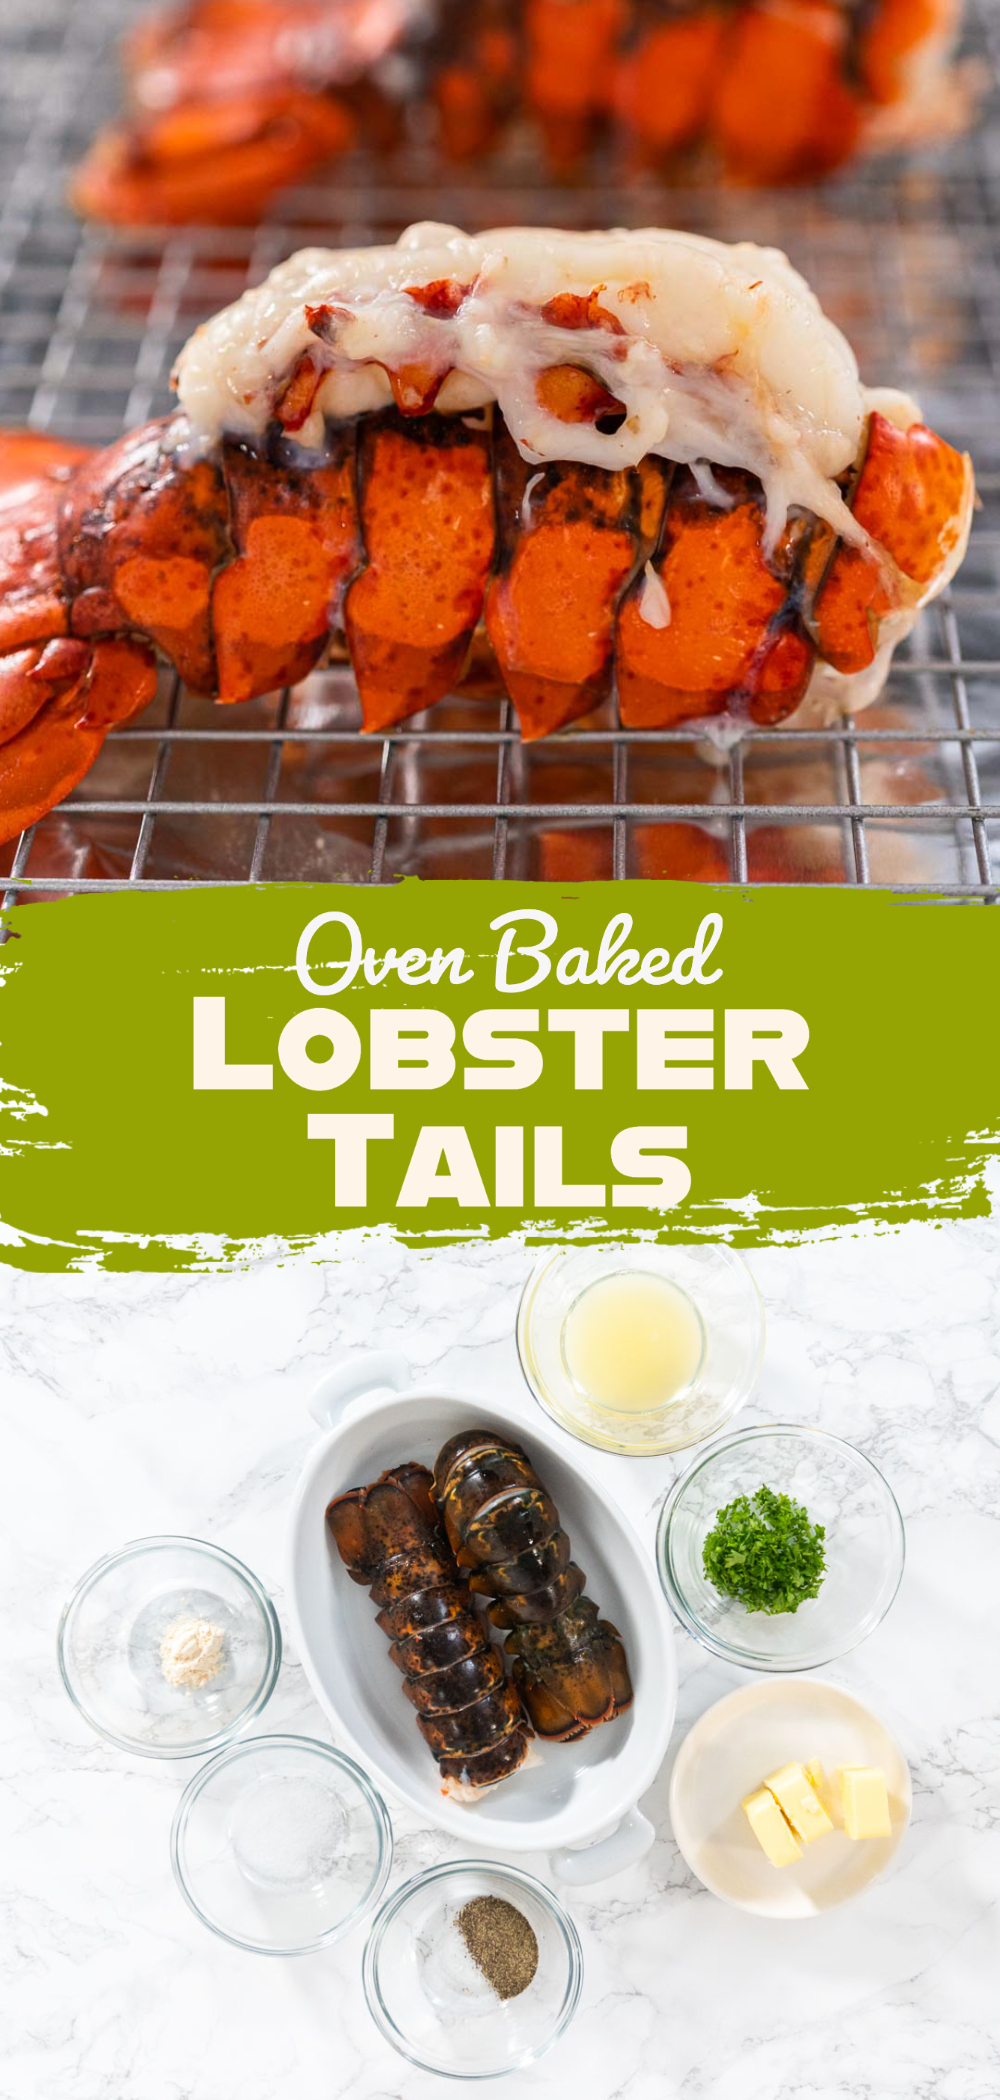 Oven Baked Lobster Tails